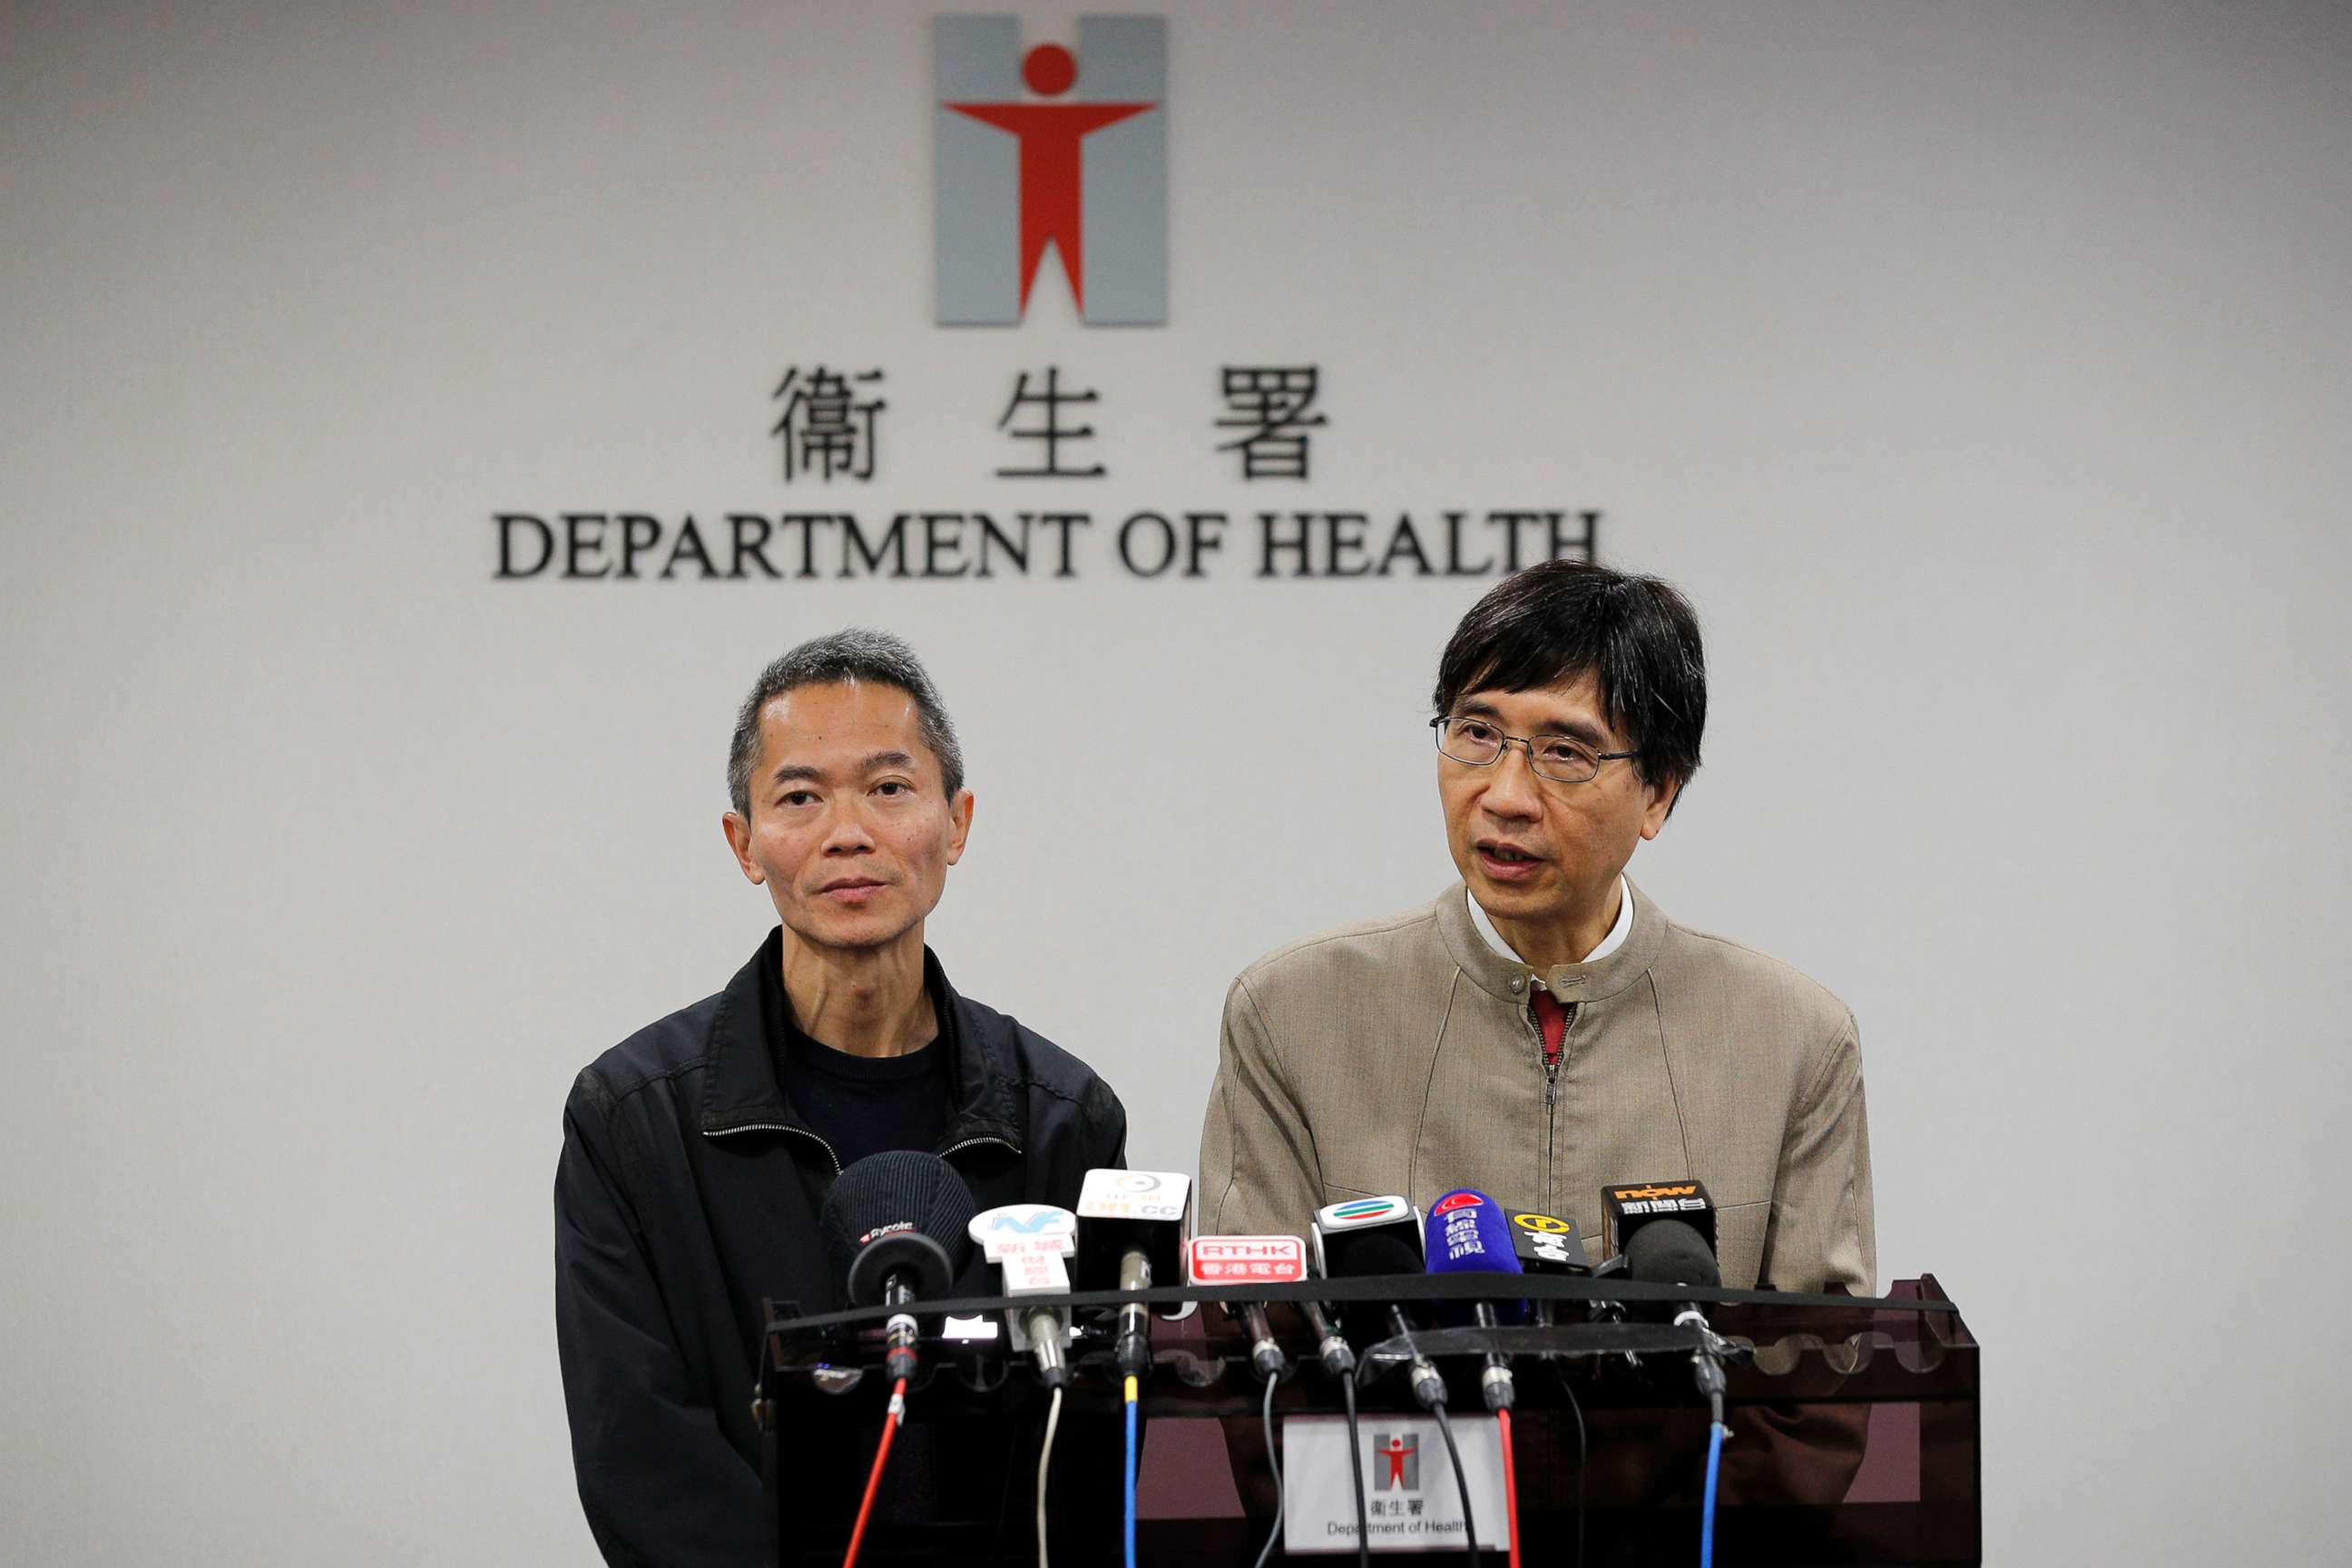 PHOTO: Professor Yuen Kwok-yung, right, speaks next to Wong Ka-hing, the Controller of the Centre for Health Protection of the Department of Health during a press conference in Hong Kong, Jan. 11, 2020.